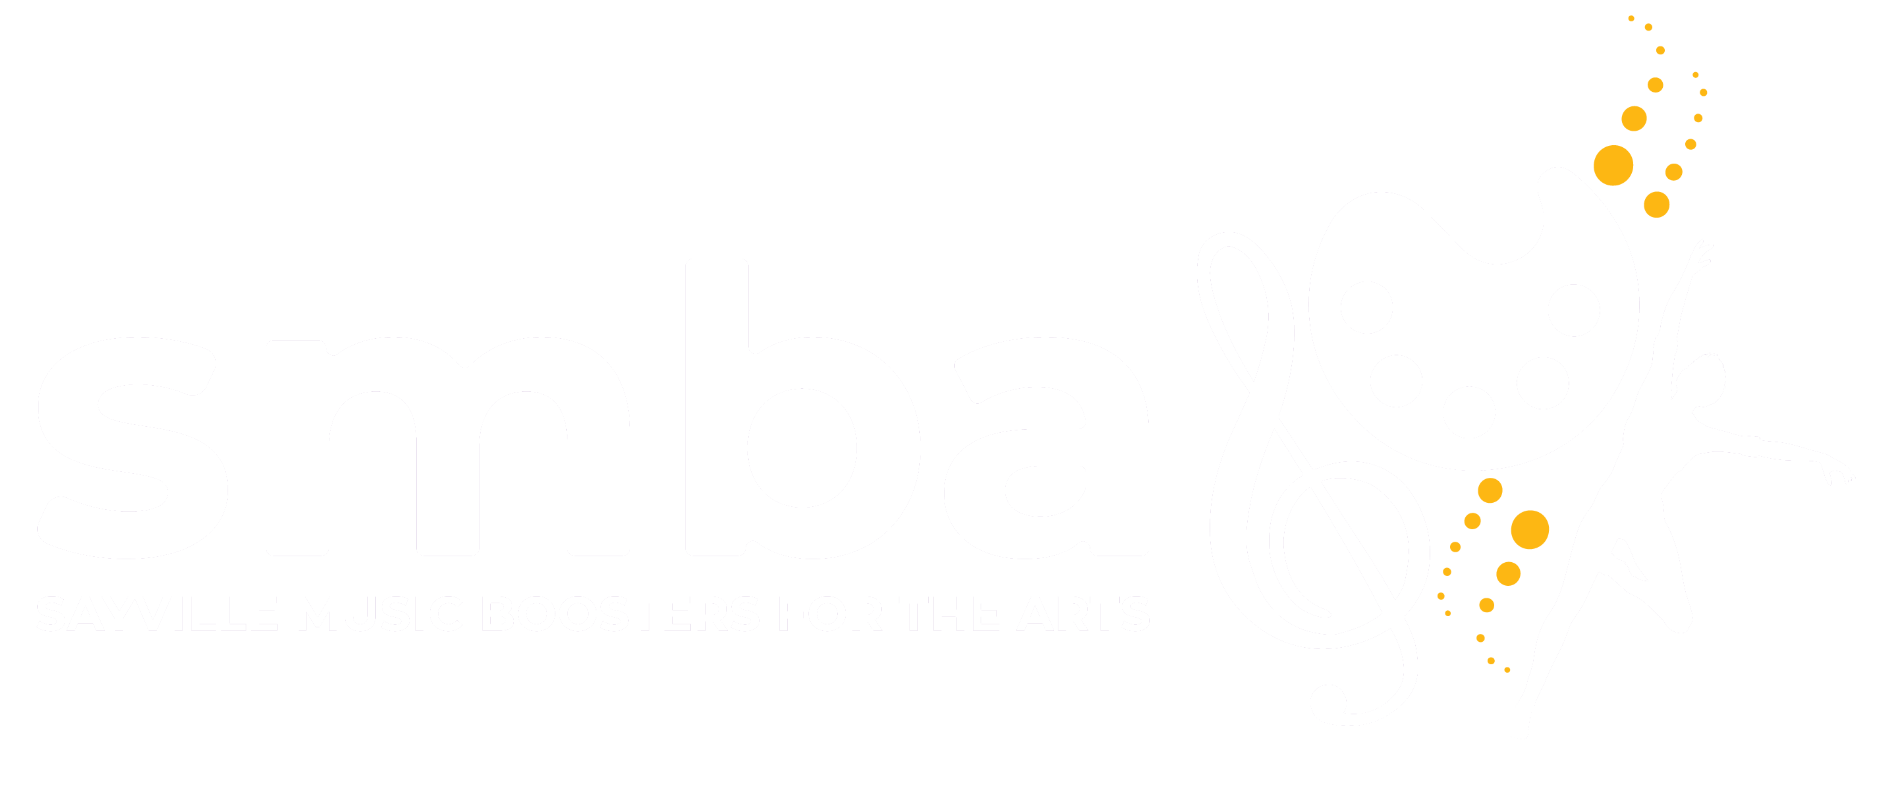 Sayville Music Boosters for the Arts